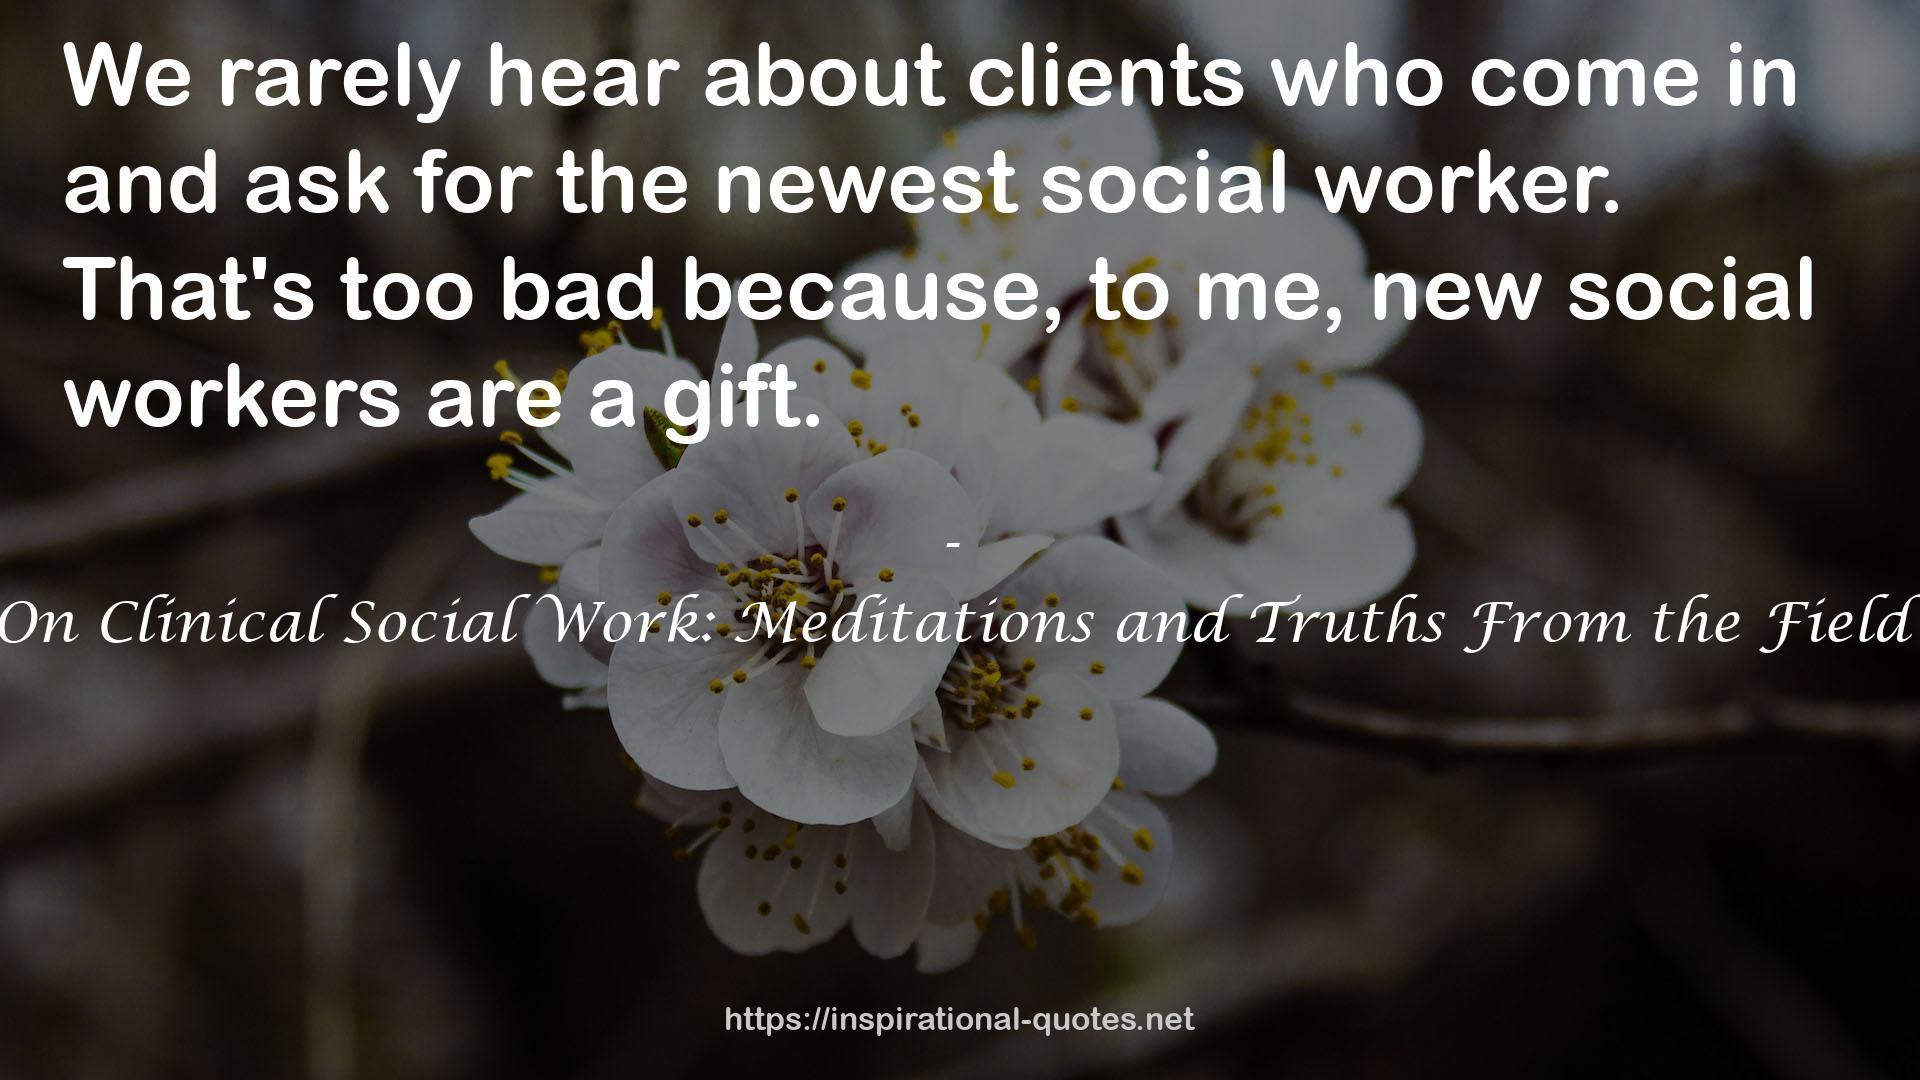 On Clinical Social Work: Meditations and Truths From the Field QUOTES